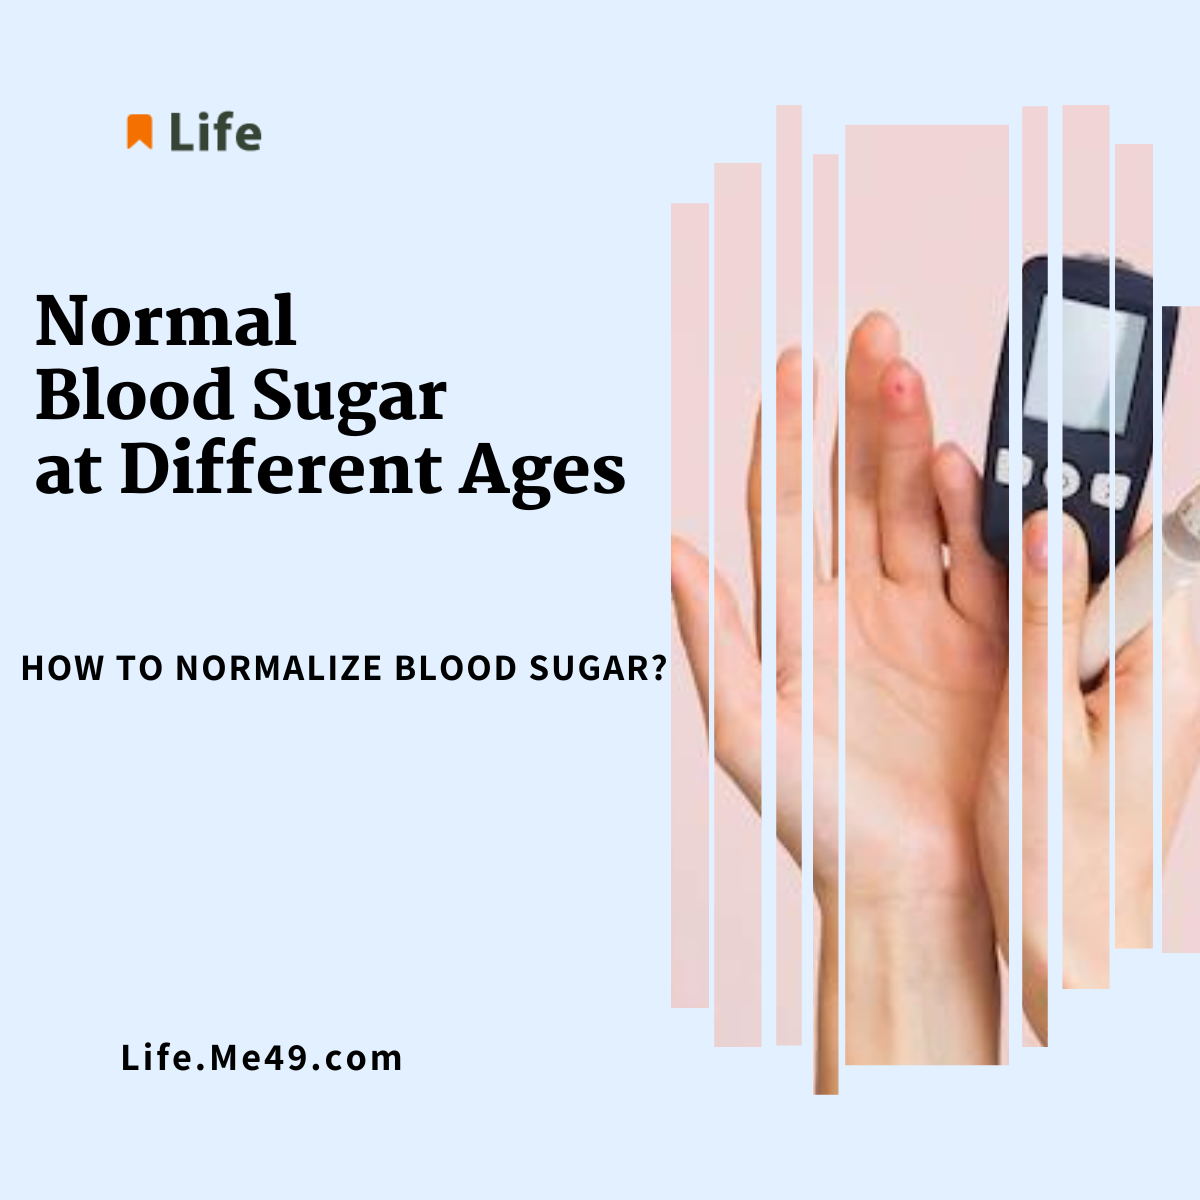 Normal Blood Sugar at Different Ages